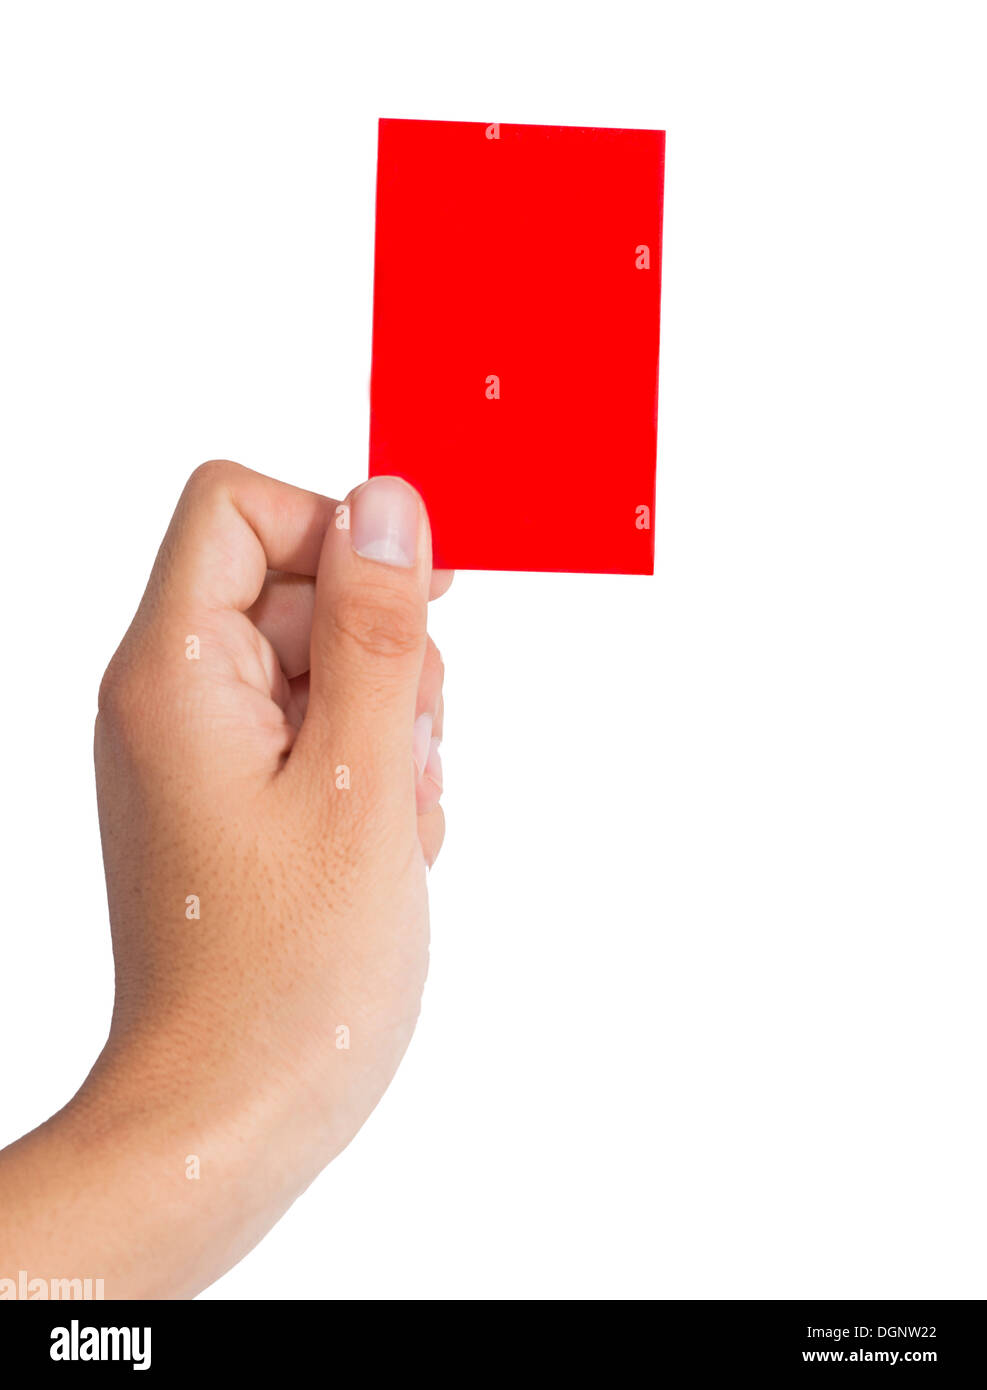 Hand holding a red card isolated on white background Stock Photo